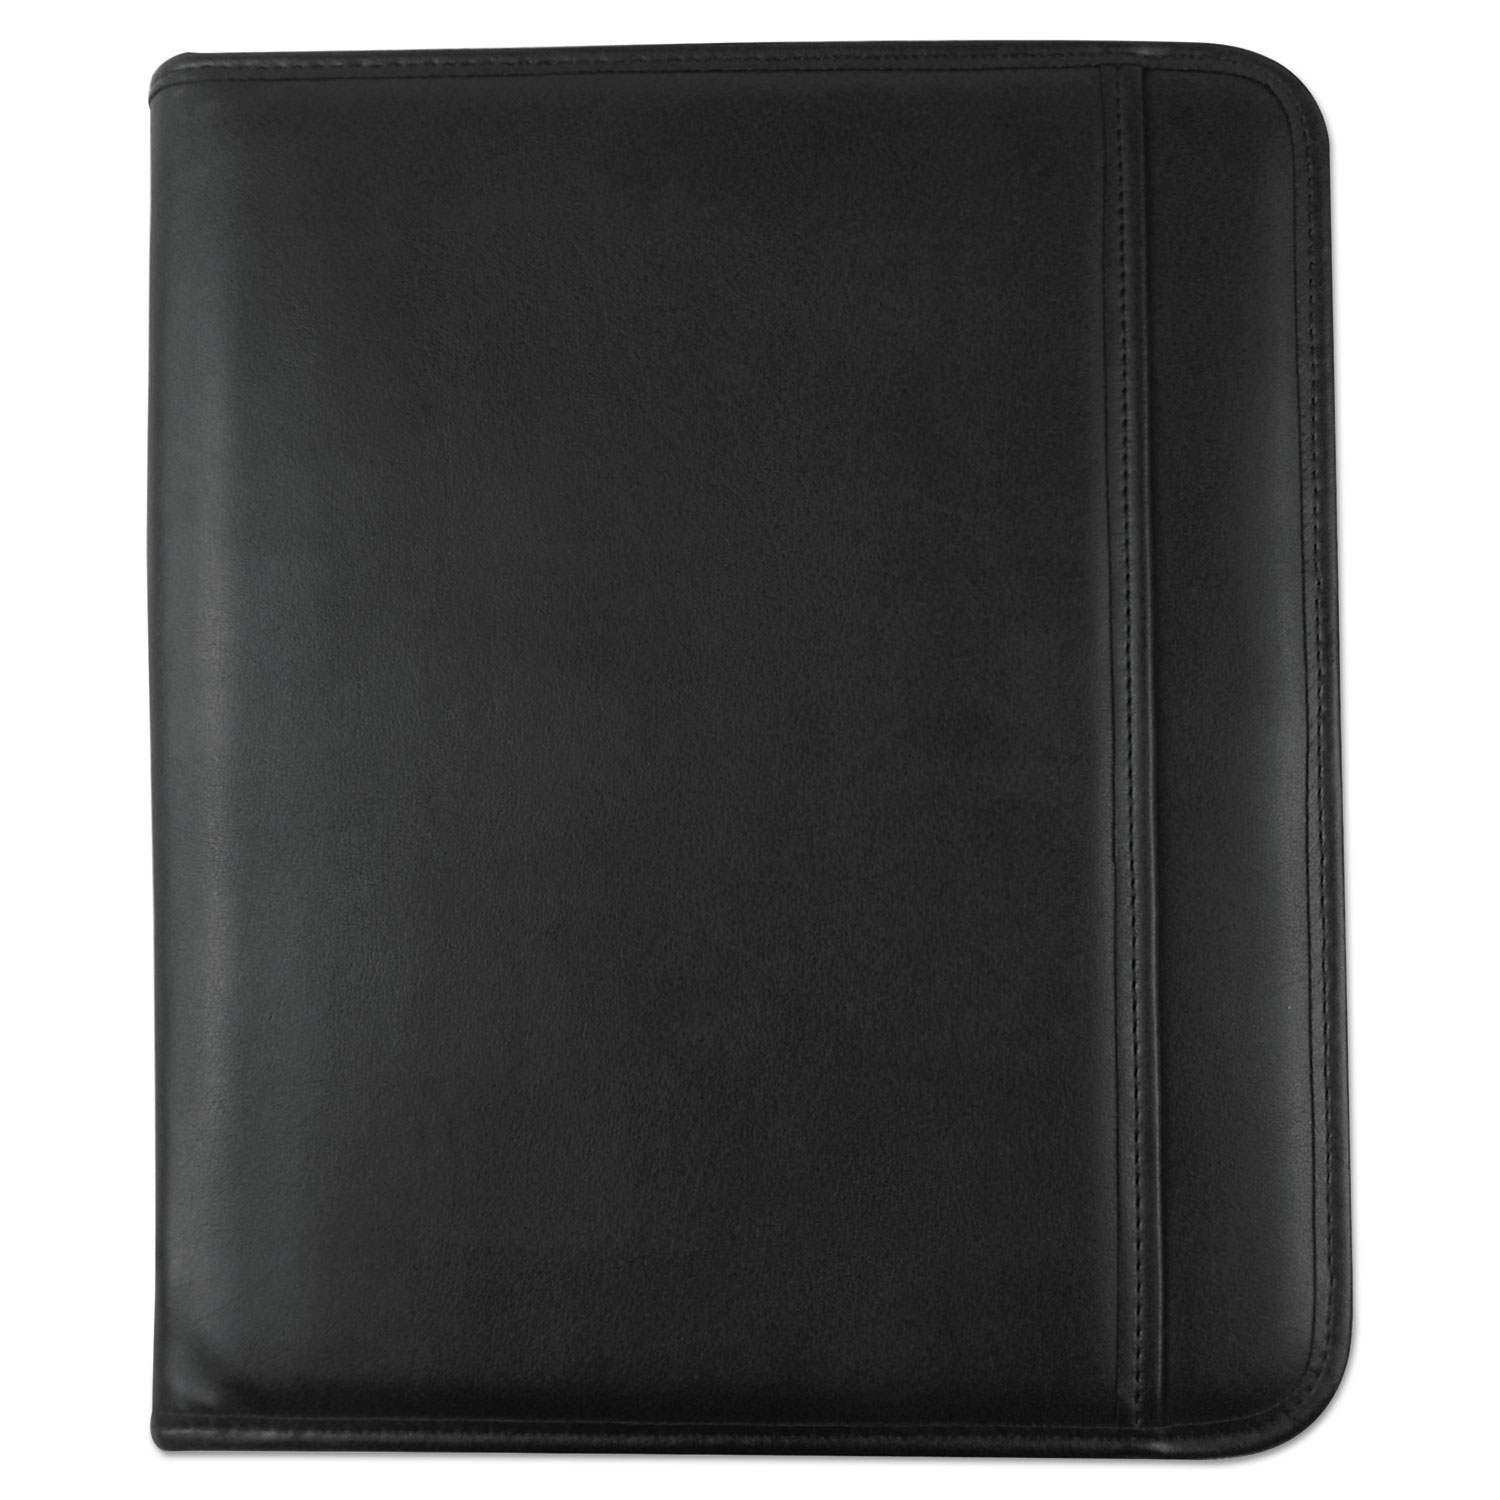 Leather Textured Zippered PadFolio with Tablet Pocket UNV32665